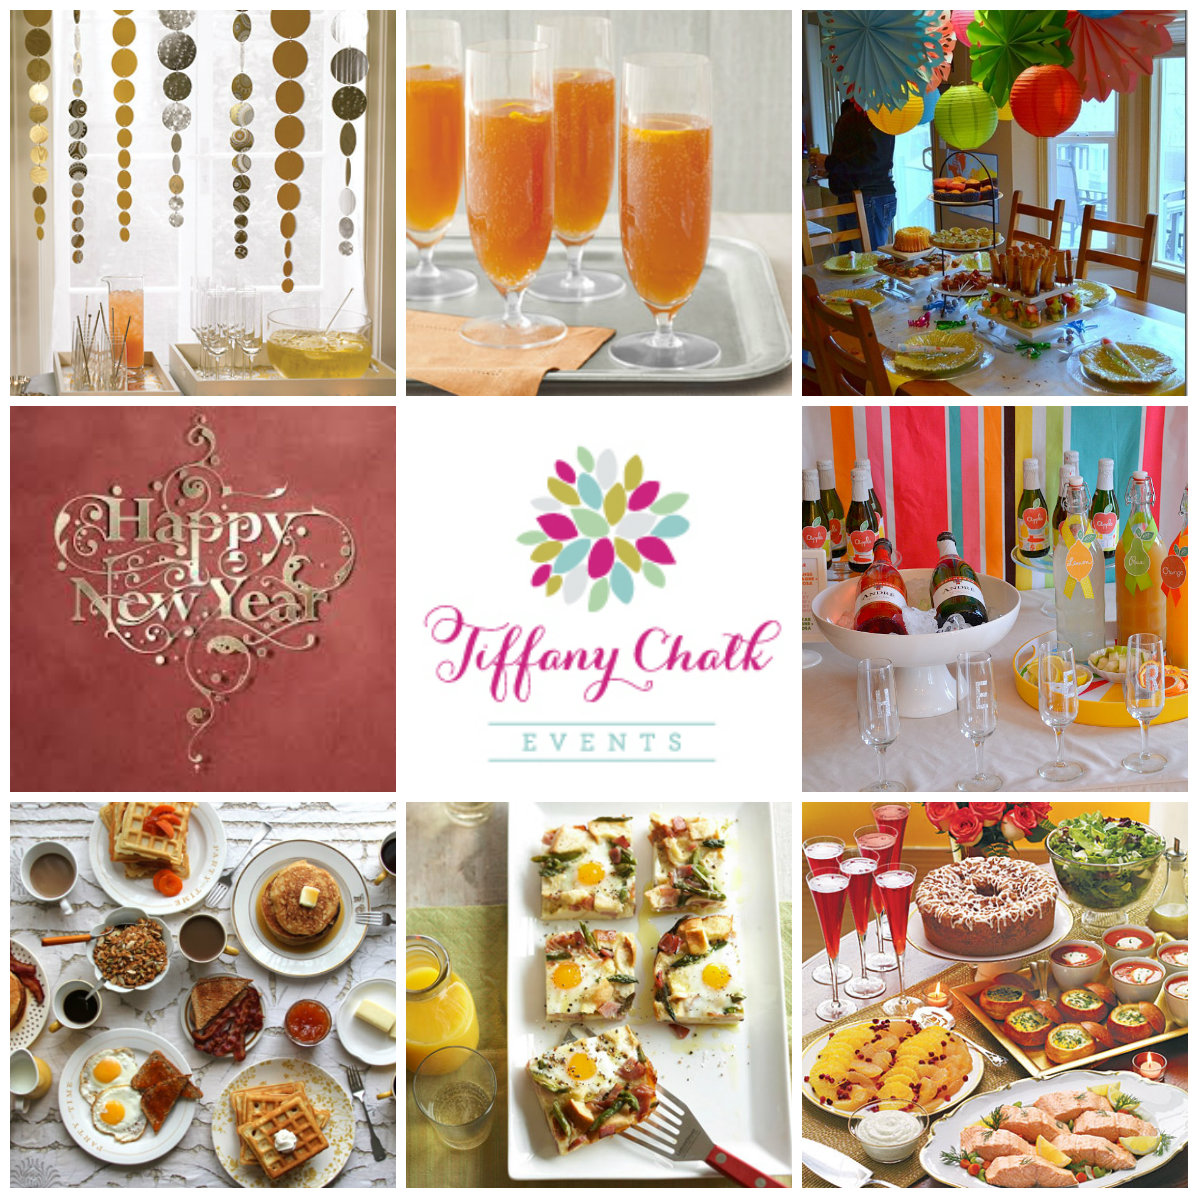 {Tiffany’s Tips} New Year’s Day Brunch!